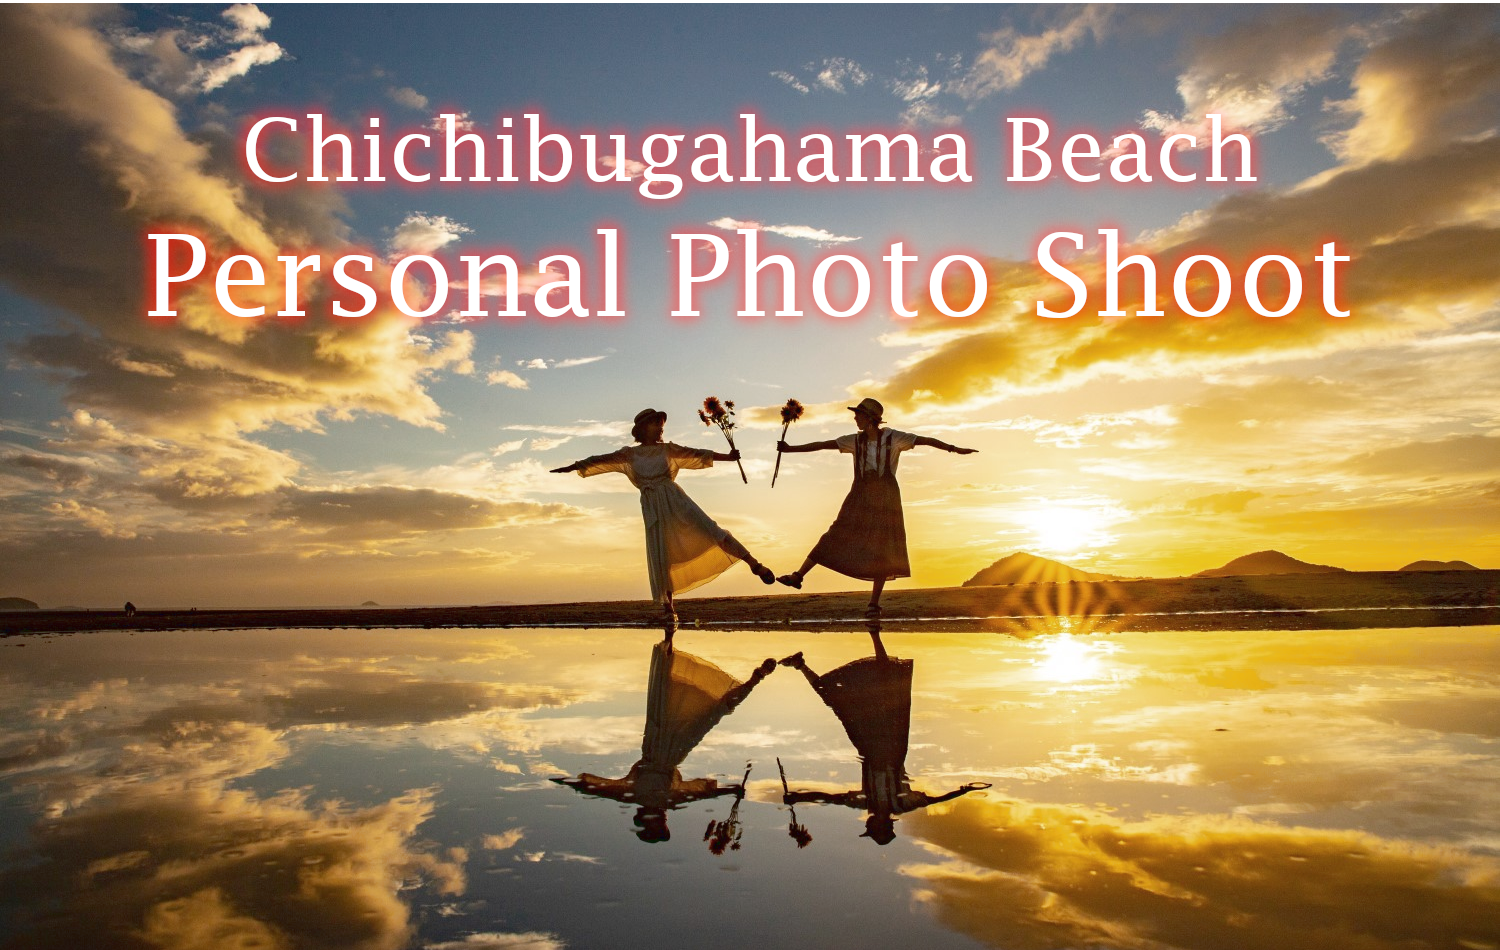 Two women standing on the beach reflected in the water below with the setting sun behind them. They are holding sunflowers and standing on one leg with the other extended, mirroring each other's pose.